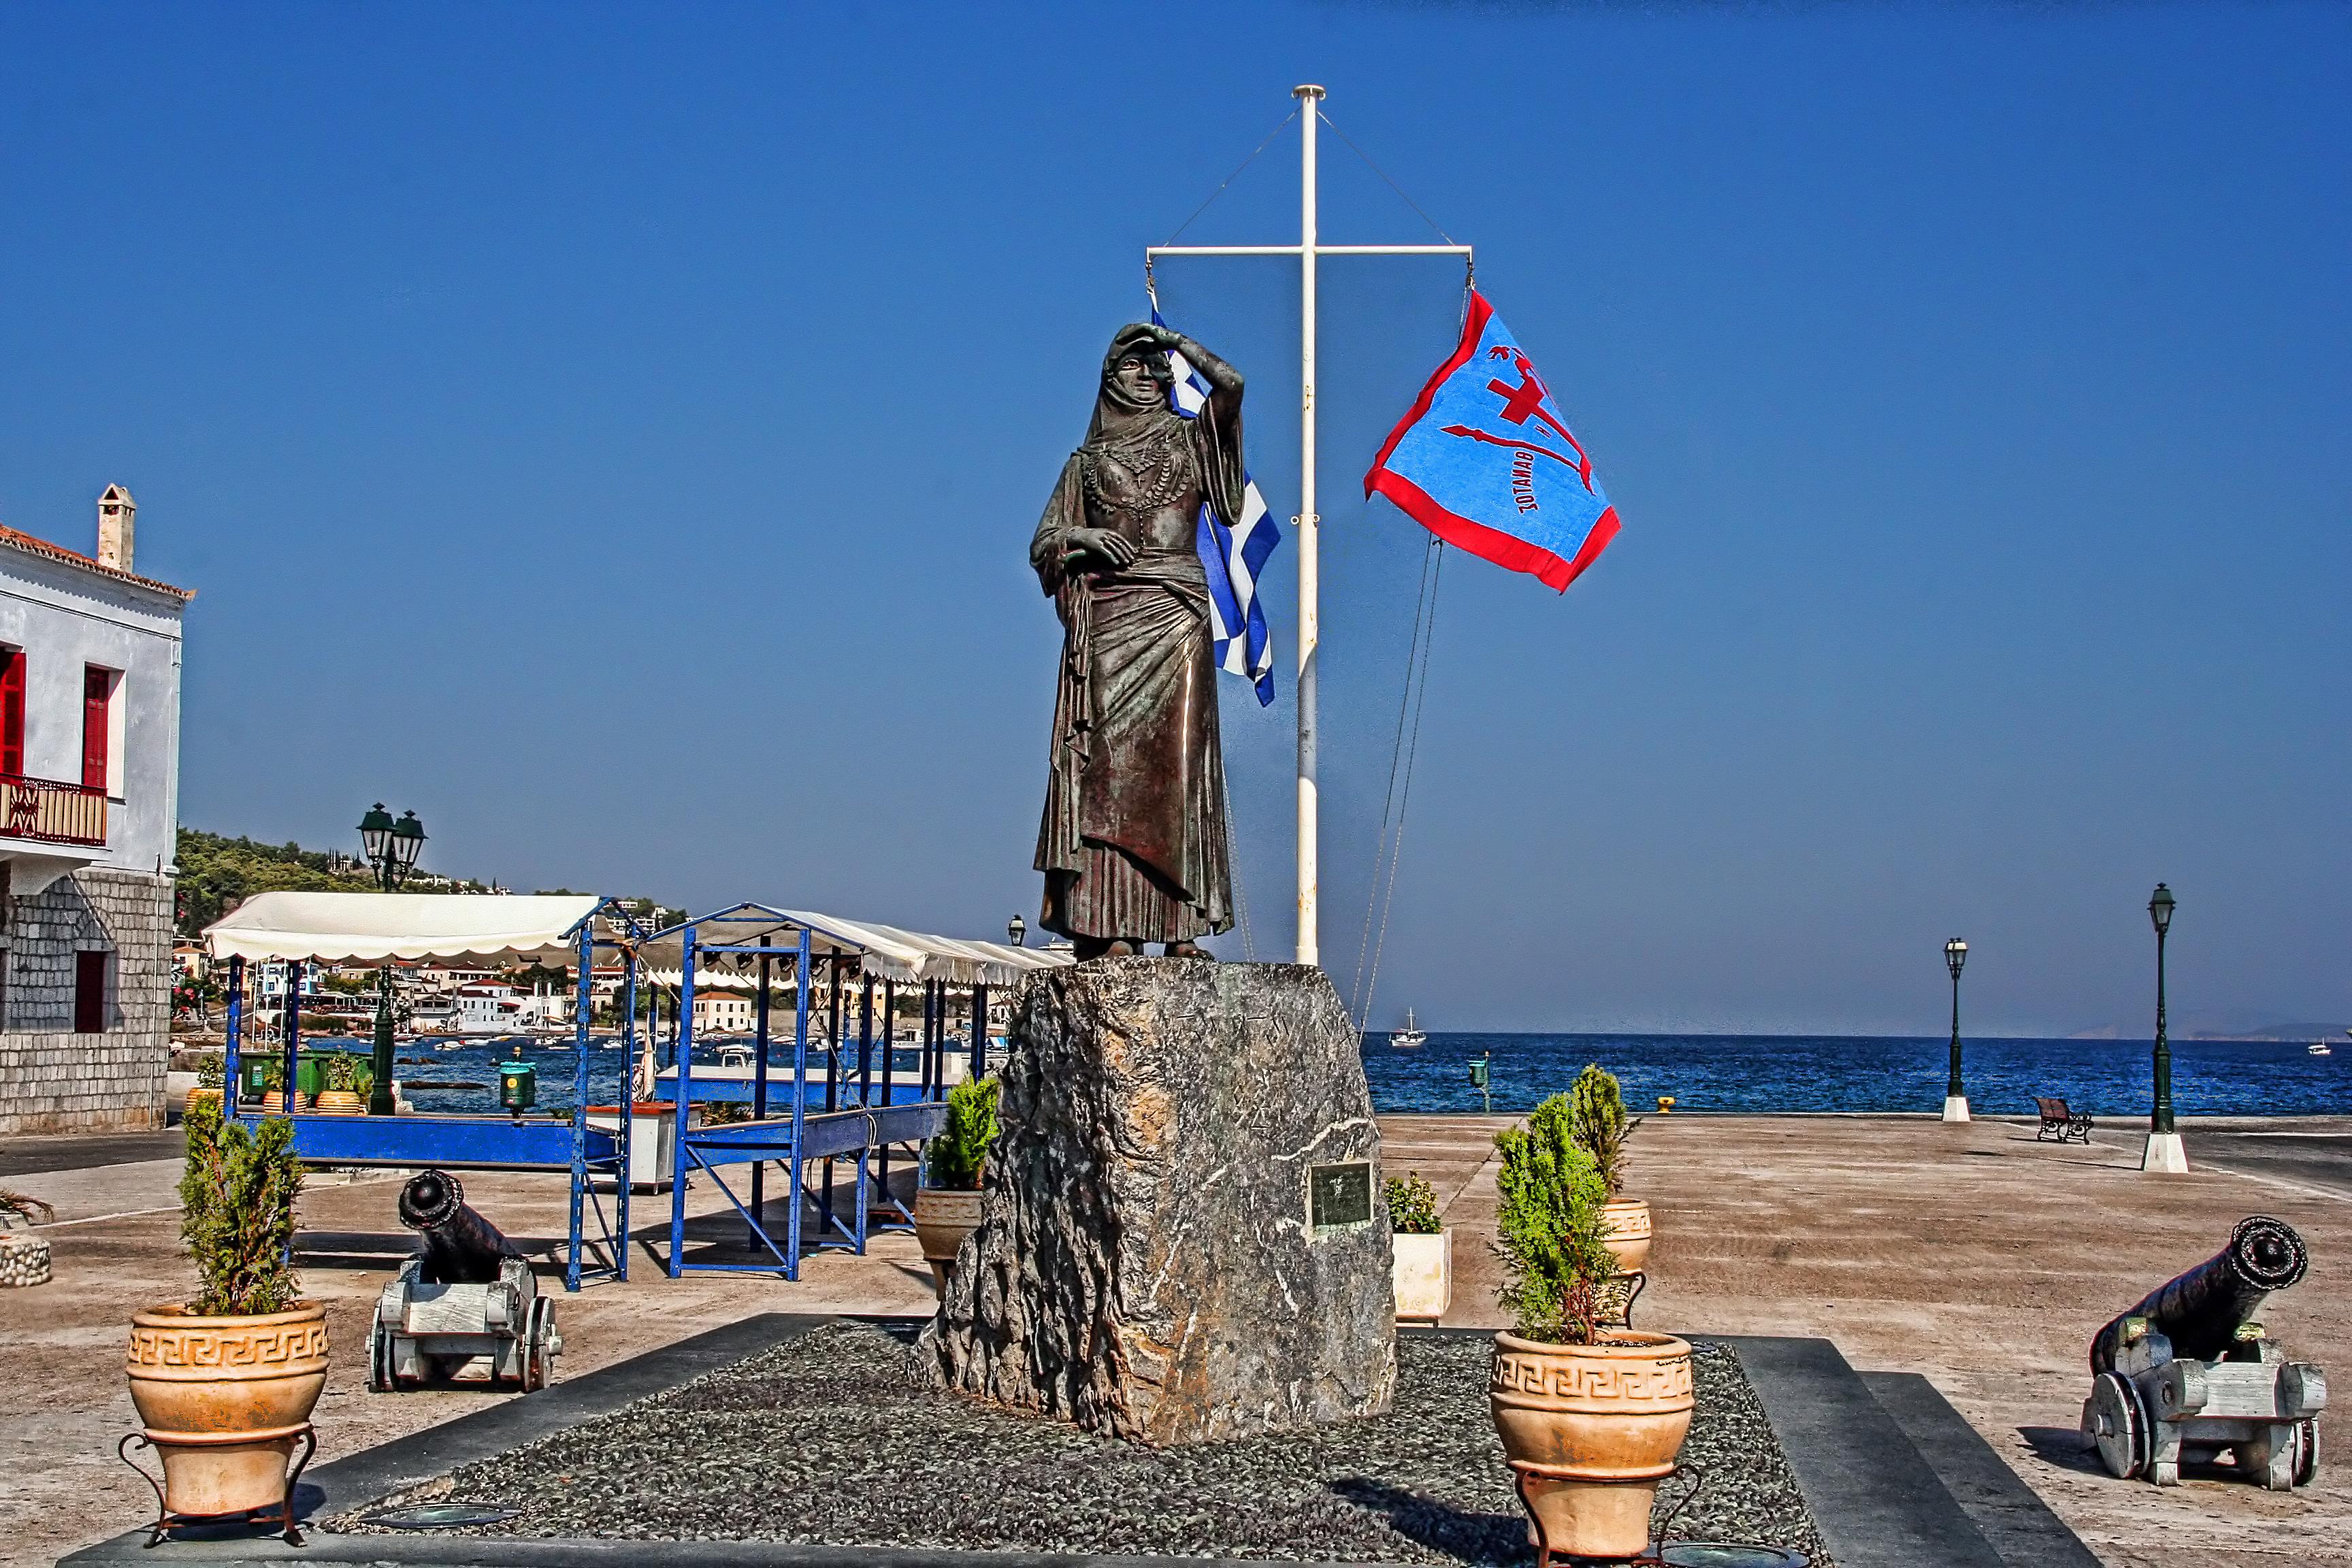 Statue of the 1821 war heroine Bouboulina in the port of Spetses. SPETSES (Small town) PIRAEUS